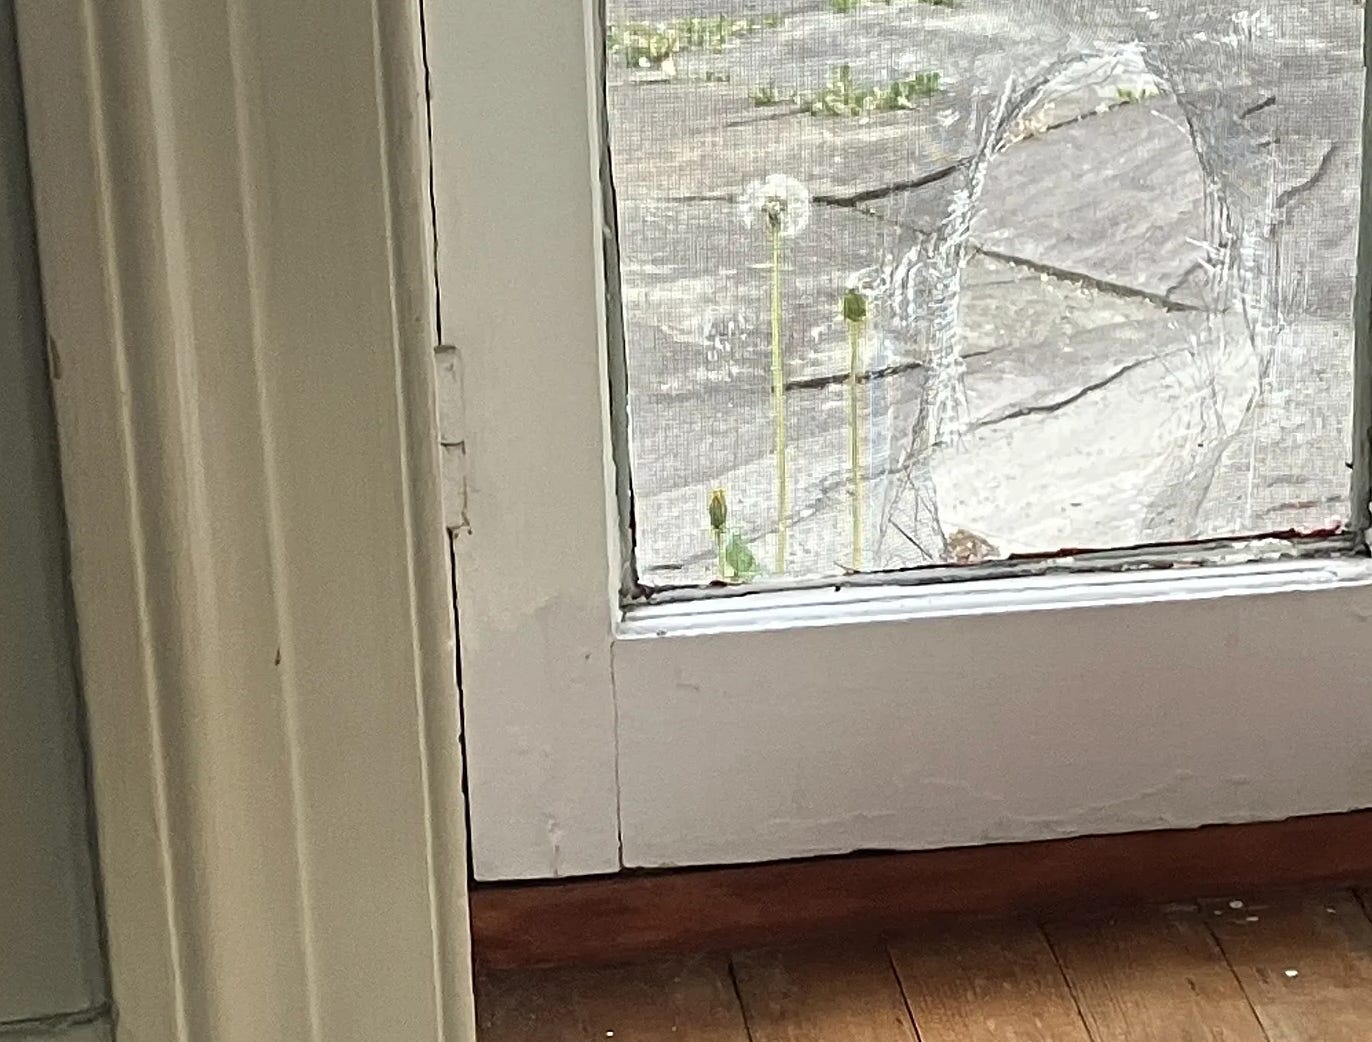 A dandelion greets me next to the hole the neighborhood cat bore through the window screen. 